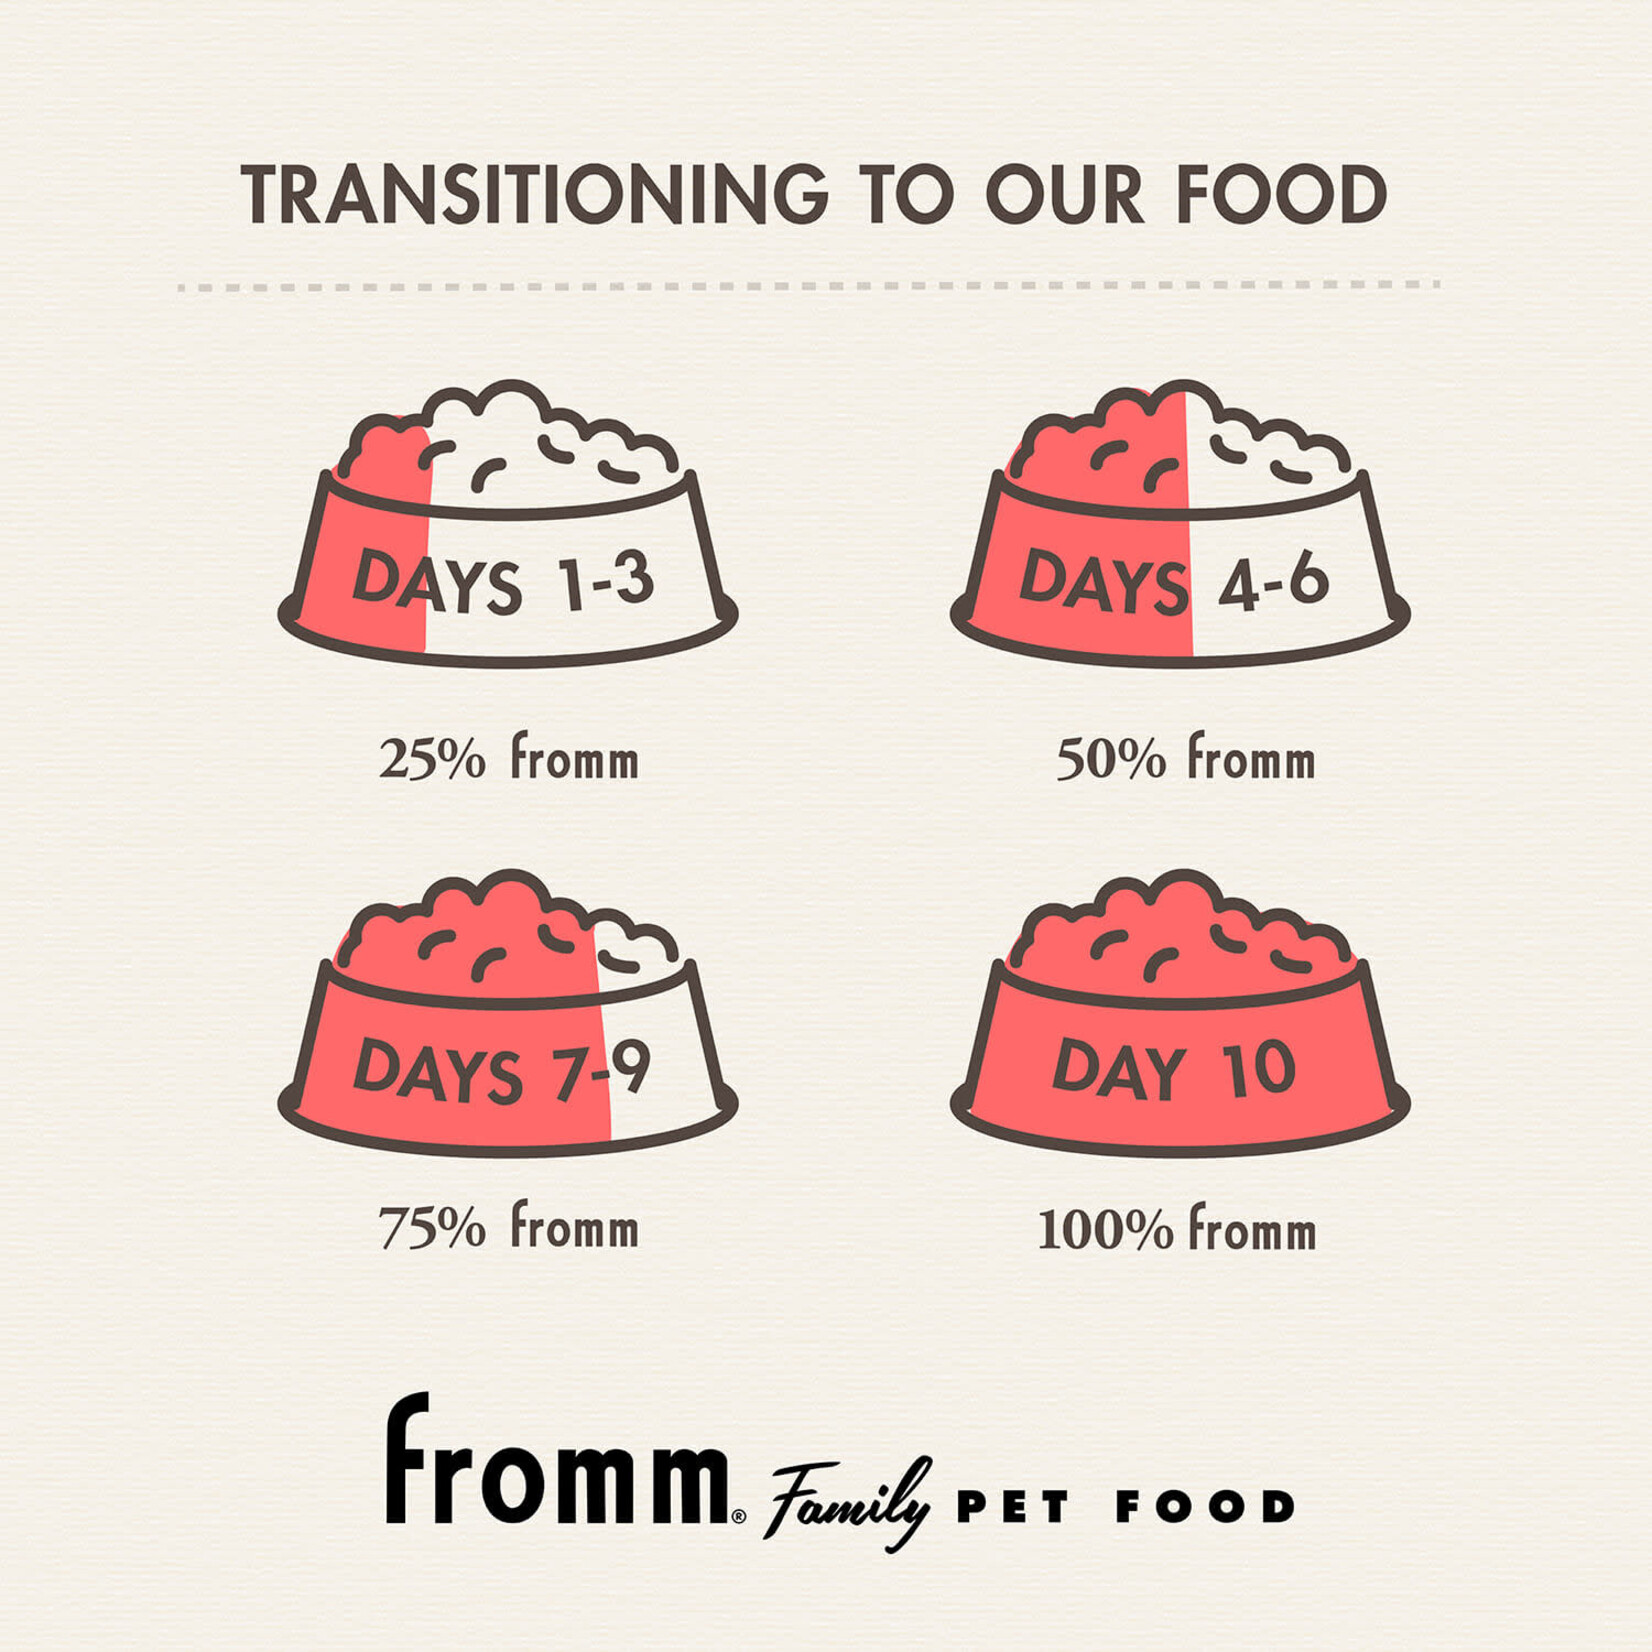 Fromm Weight Management Gold Food for Dogs